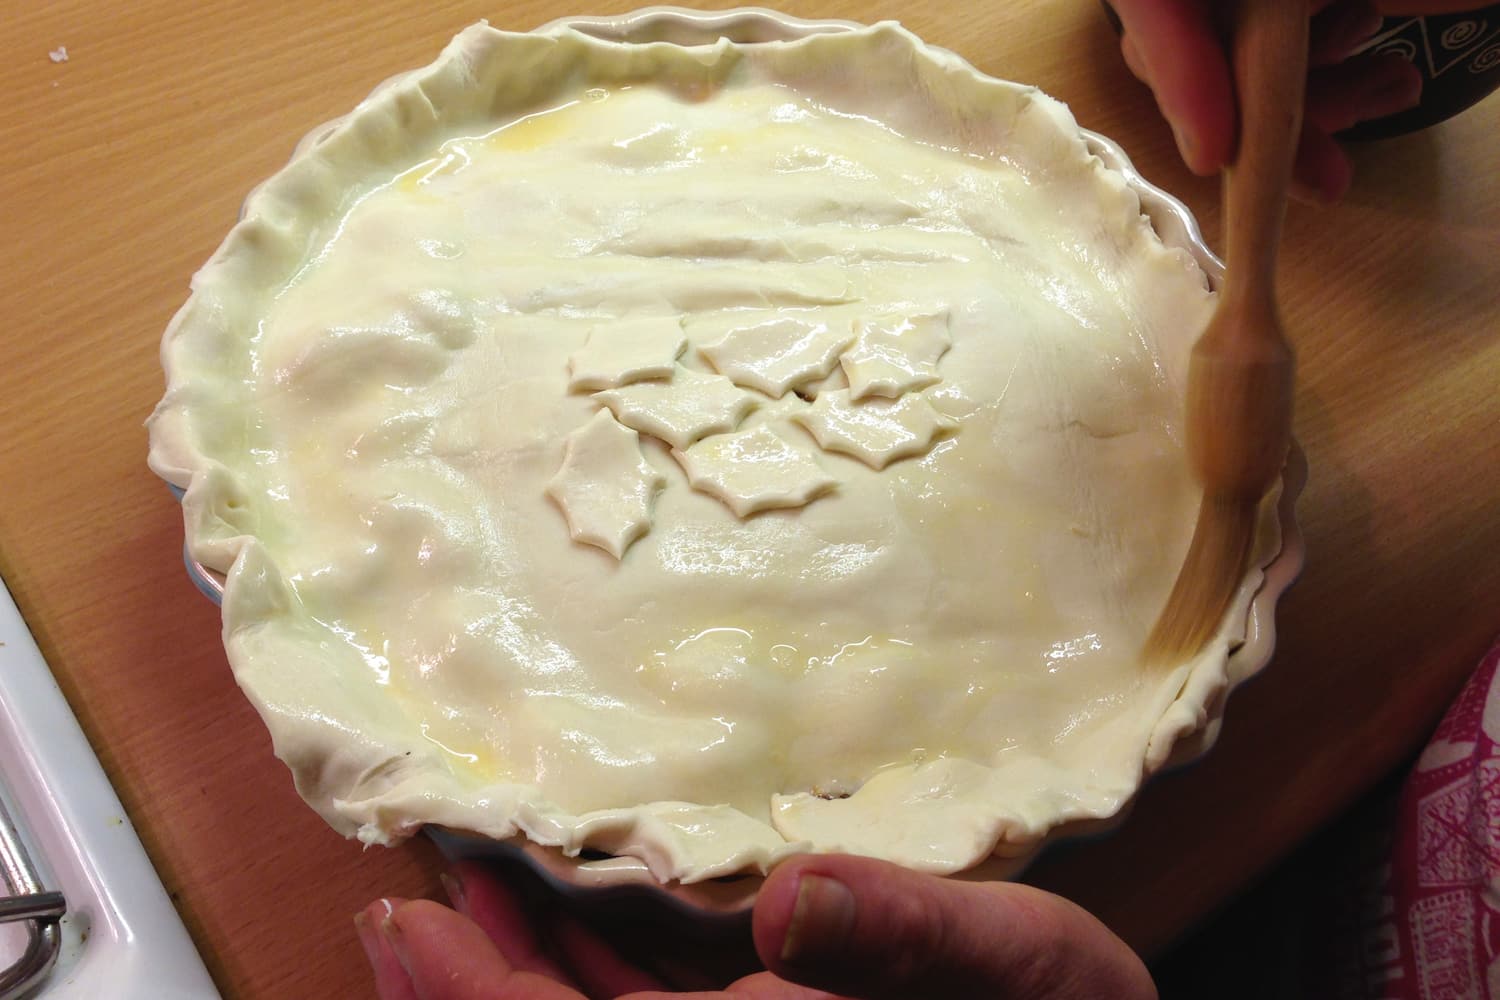 Brushing the pastry with egg wash